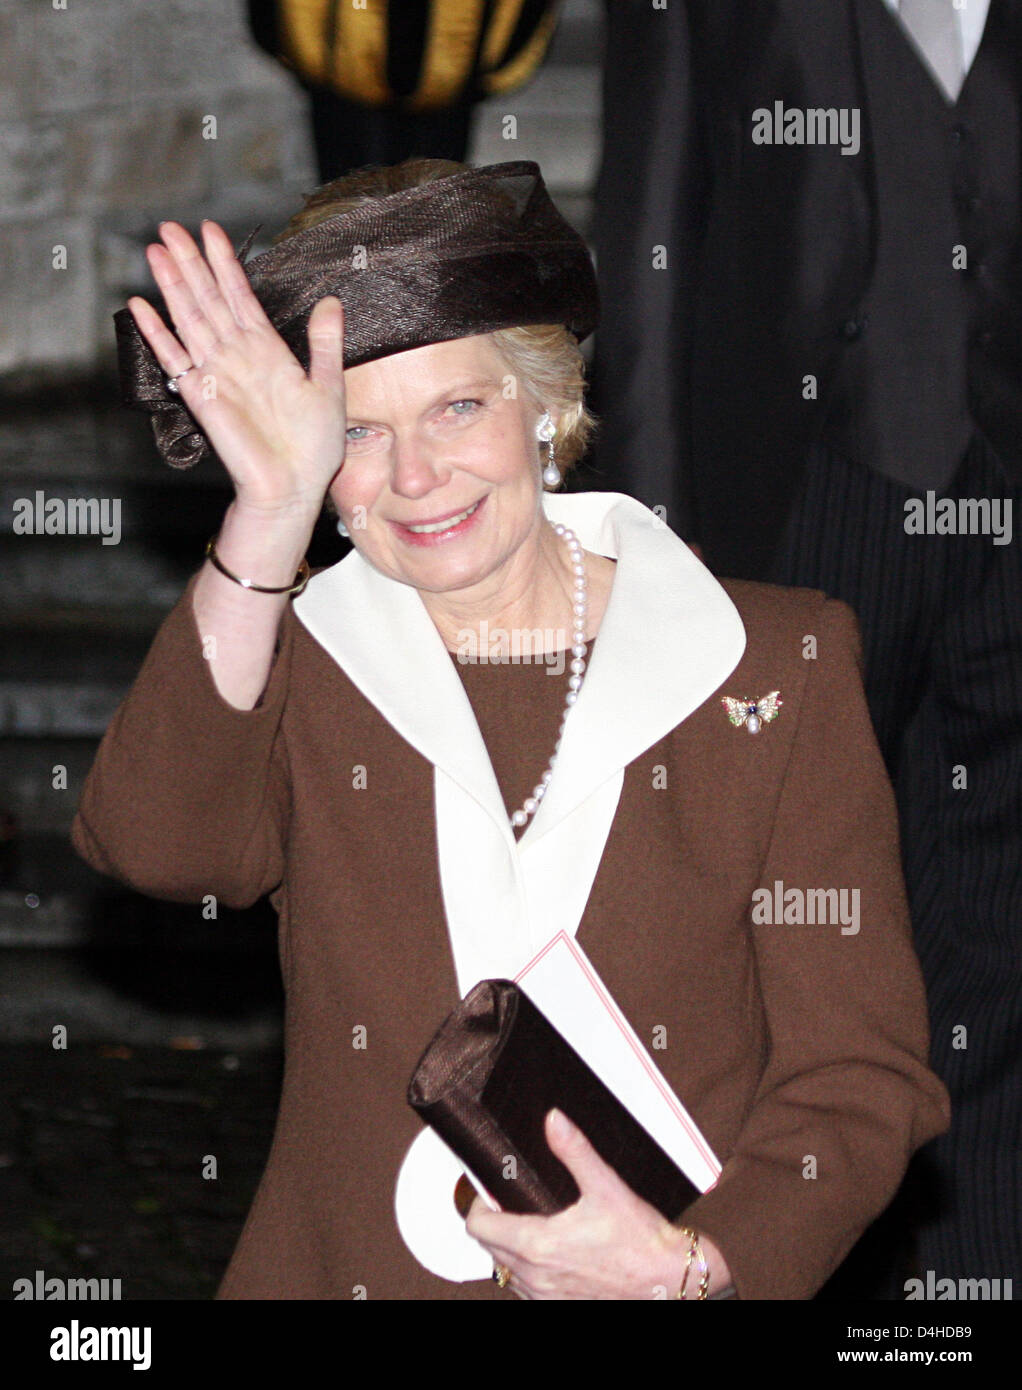 Princess Marie-Astrid of Luxembourg, mother of the bride, attends the civil wedding of Archduchess Marie Christine of Austria and Count Rodolphe of Limburg Stirum at the City Hall in Mechelen, Belgium, 06 December 2008. Photo: Albert Nieboer  (NETHERLANDS OUT) Stock Photo